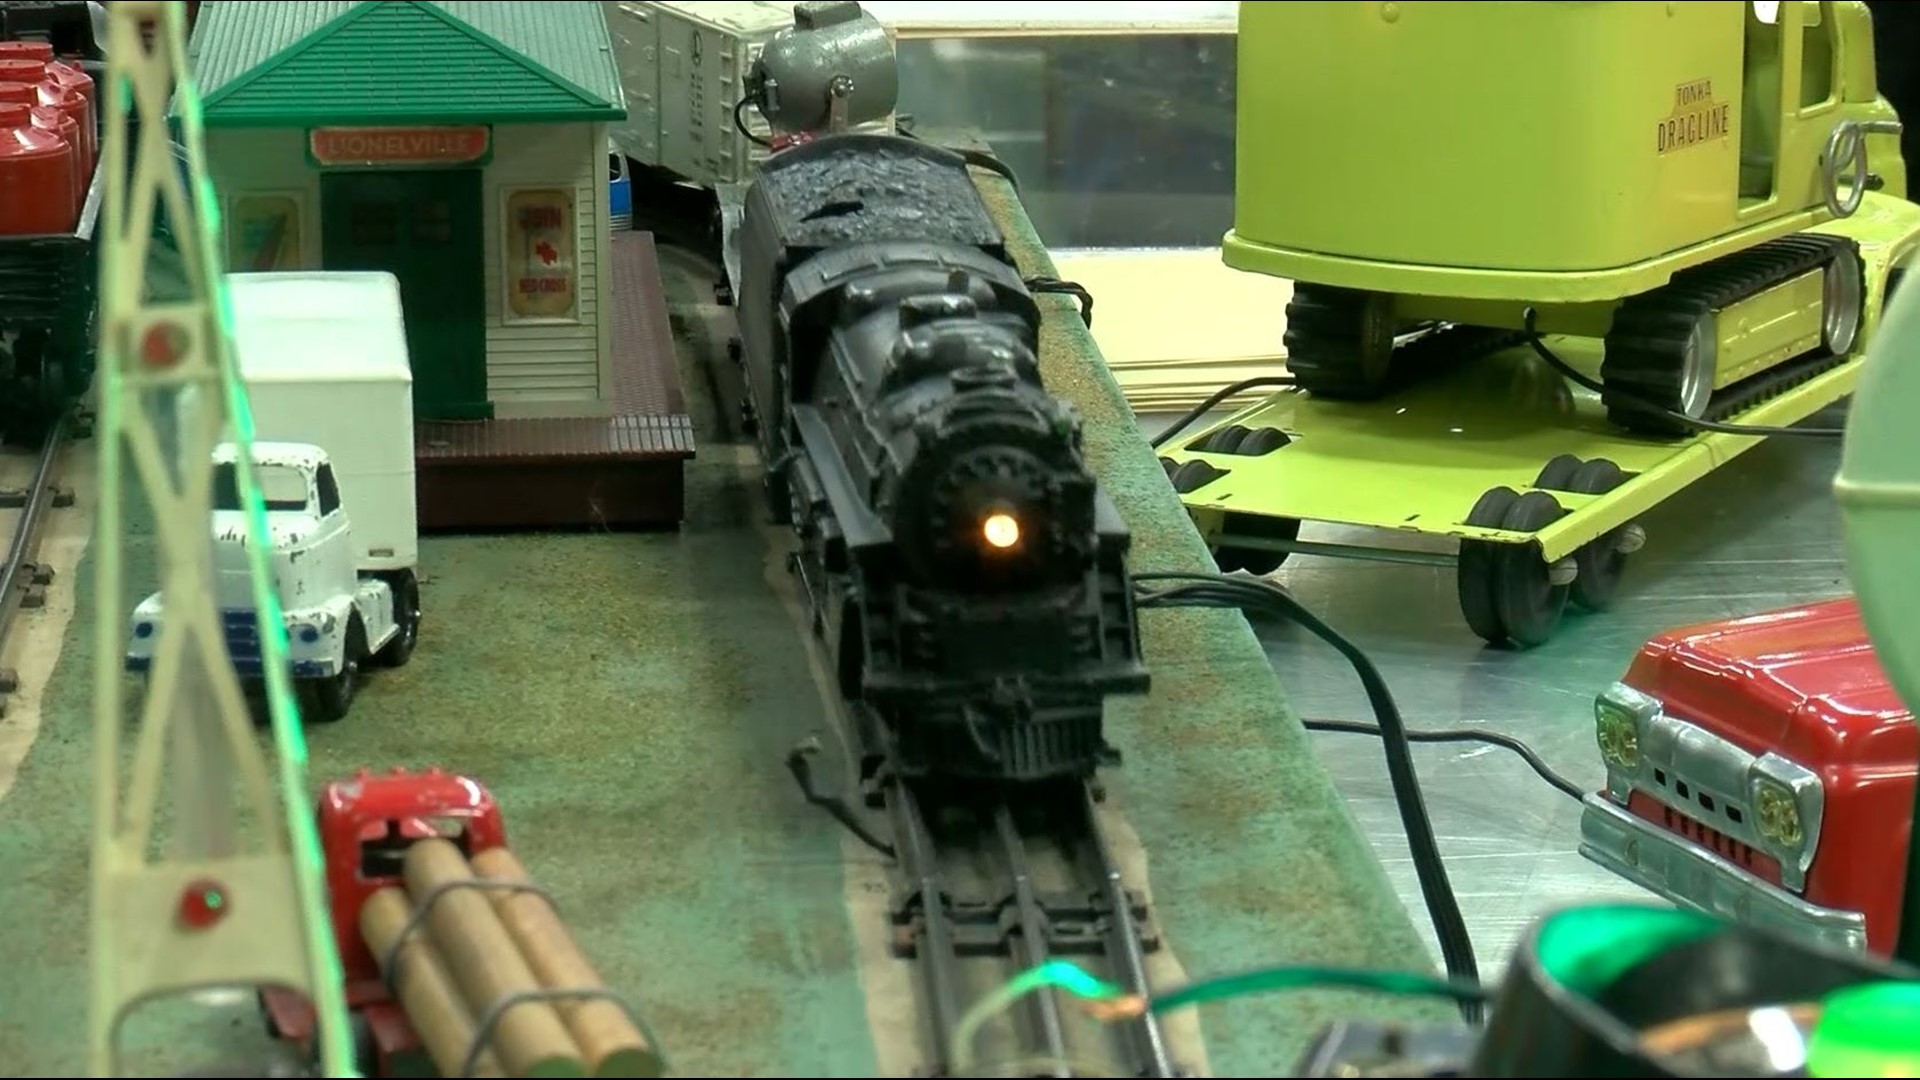 This is the 25th year for the event, which promoters say is the most well attended toy and train show in Ohio.